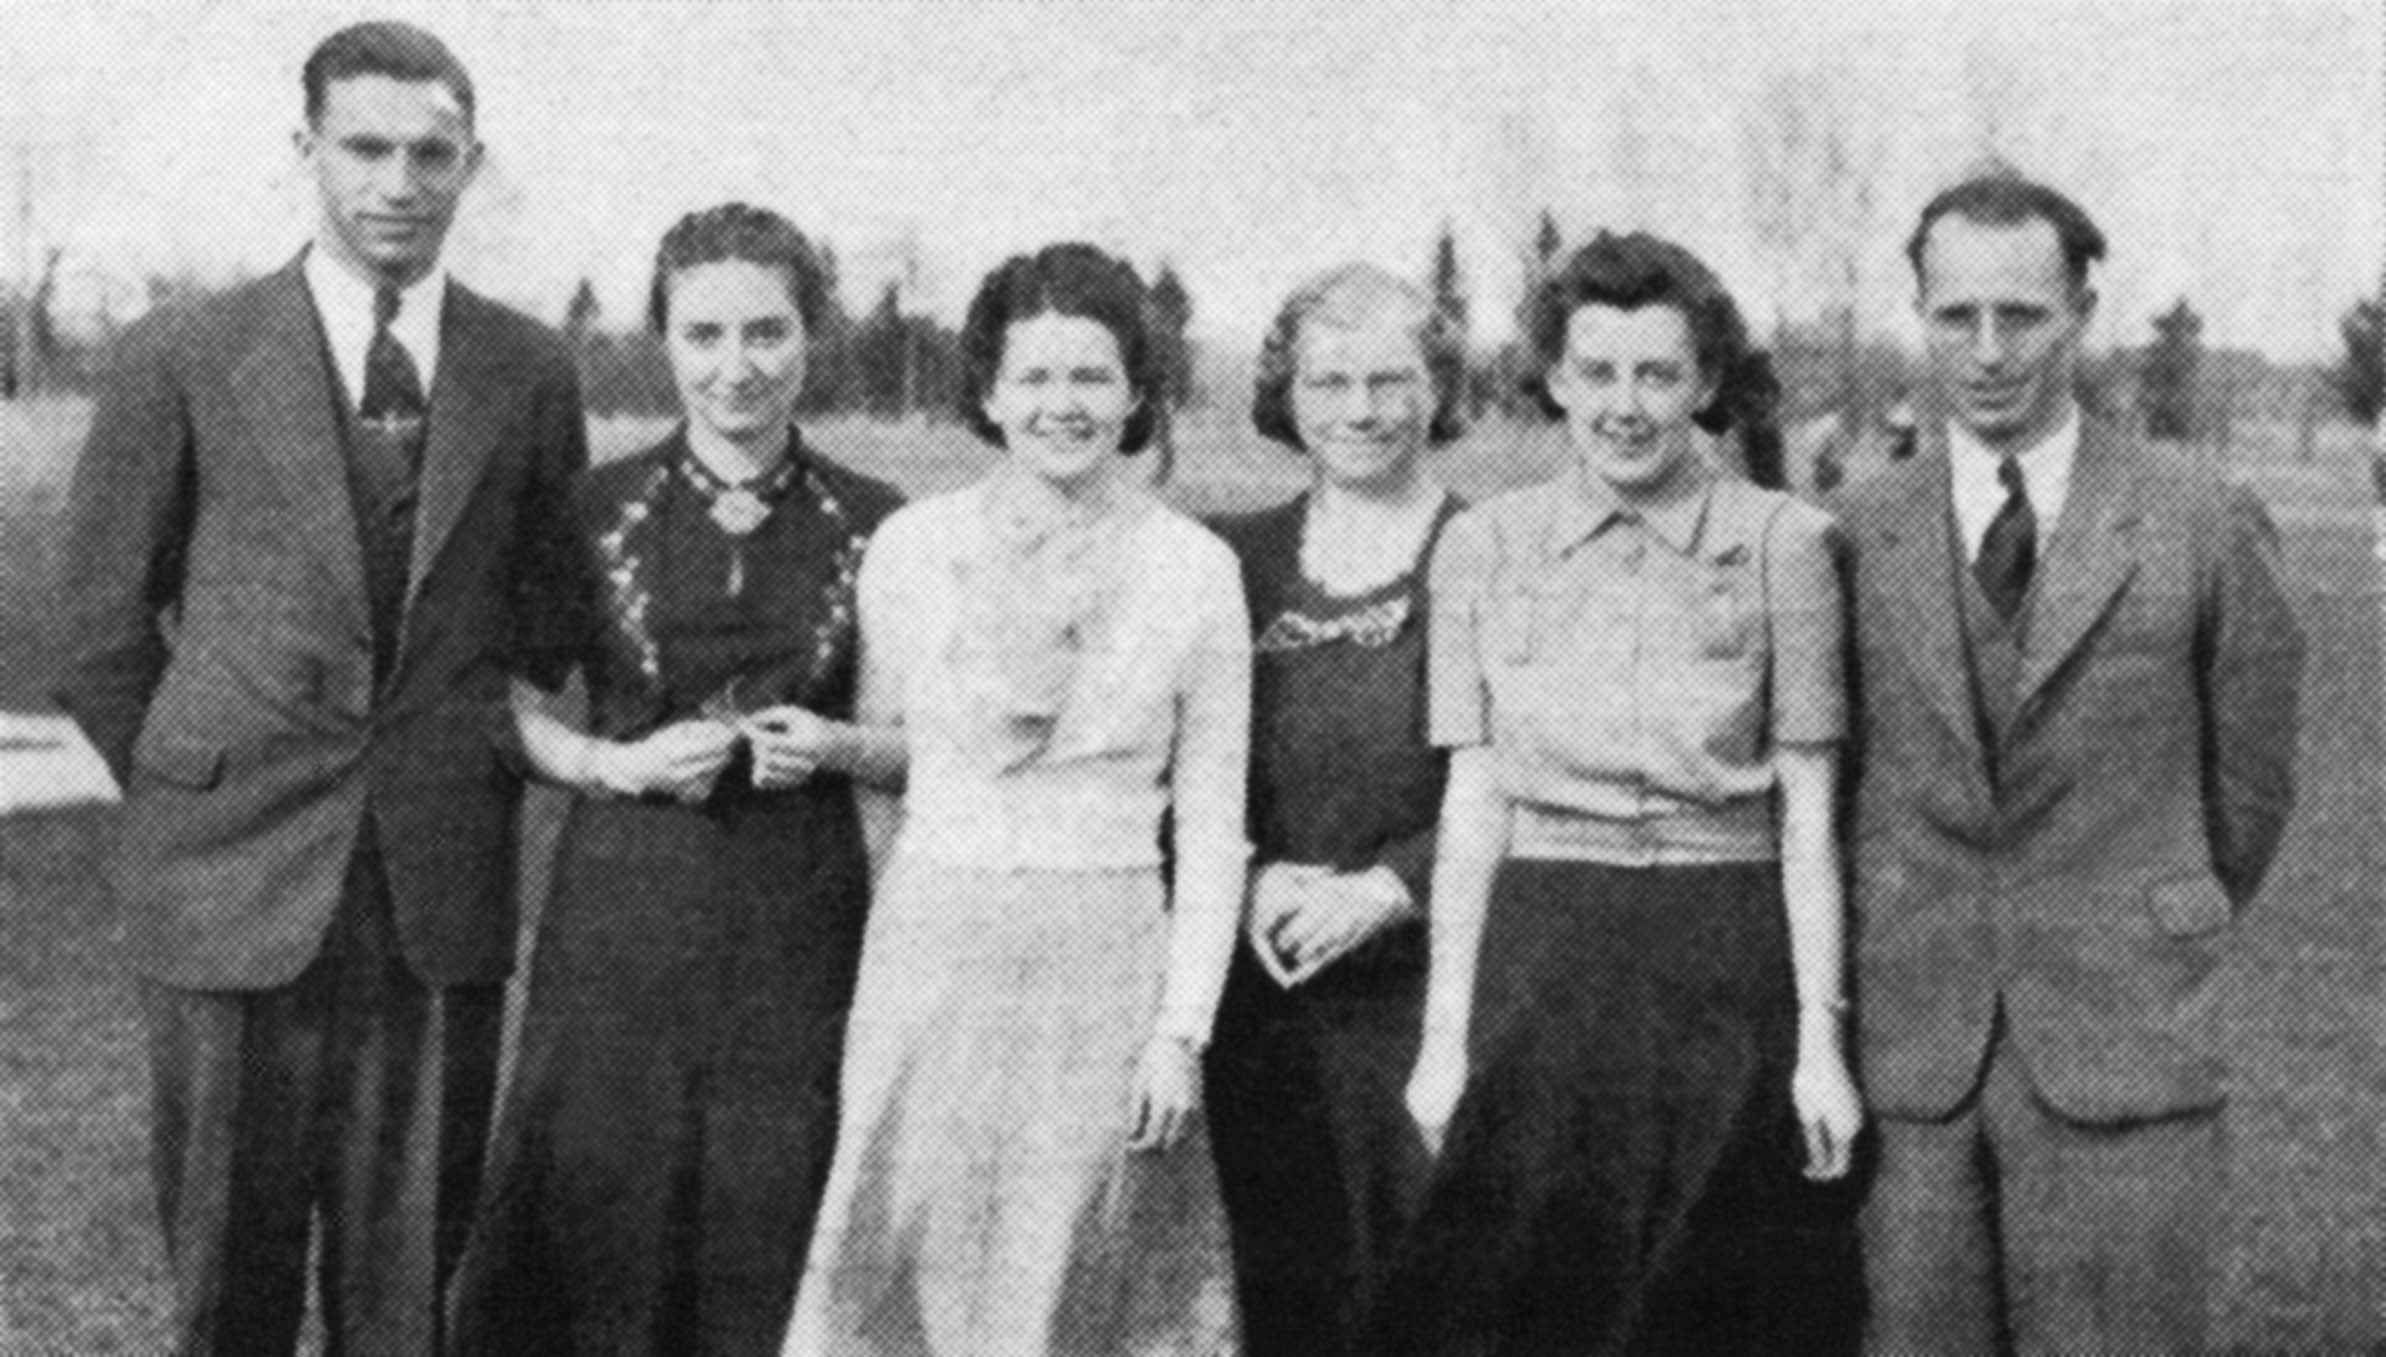 (Click to magnify) The photo is not directly captioned. There is a profile for each of the following - perhaps in the same order as the teachers above: D. A. MacRae, Miss Feir, Miss Gordon, Miss Roberts, Mrs. Lemay, Mr. Welch.